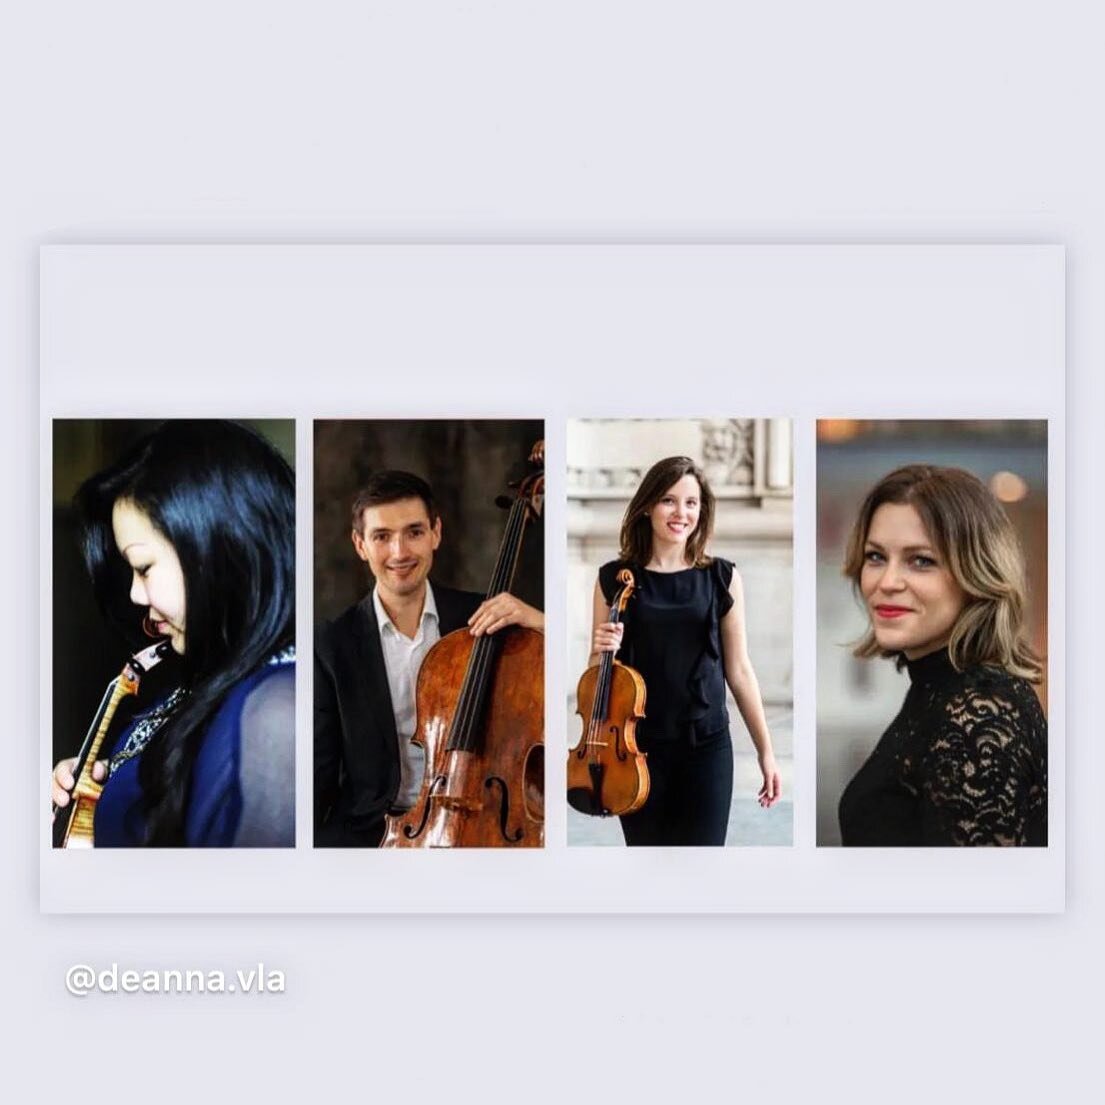 chamber music as it was meant to be! 
Intimate and with friends. 

Join us this weekend in either Maastricht @luthersekerk_maastricht or Heythuysen @bombardon_heythuysen. 

Ticket link in bio or DM.

@violincordelia 
@deanna.vla 
@andrewbriggscello 
